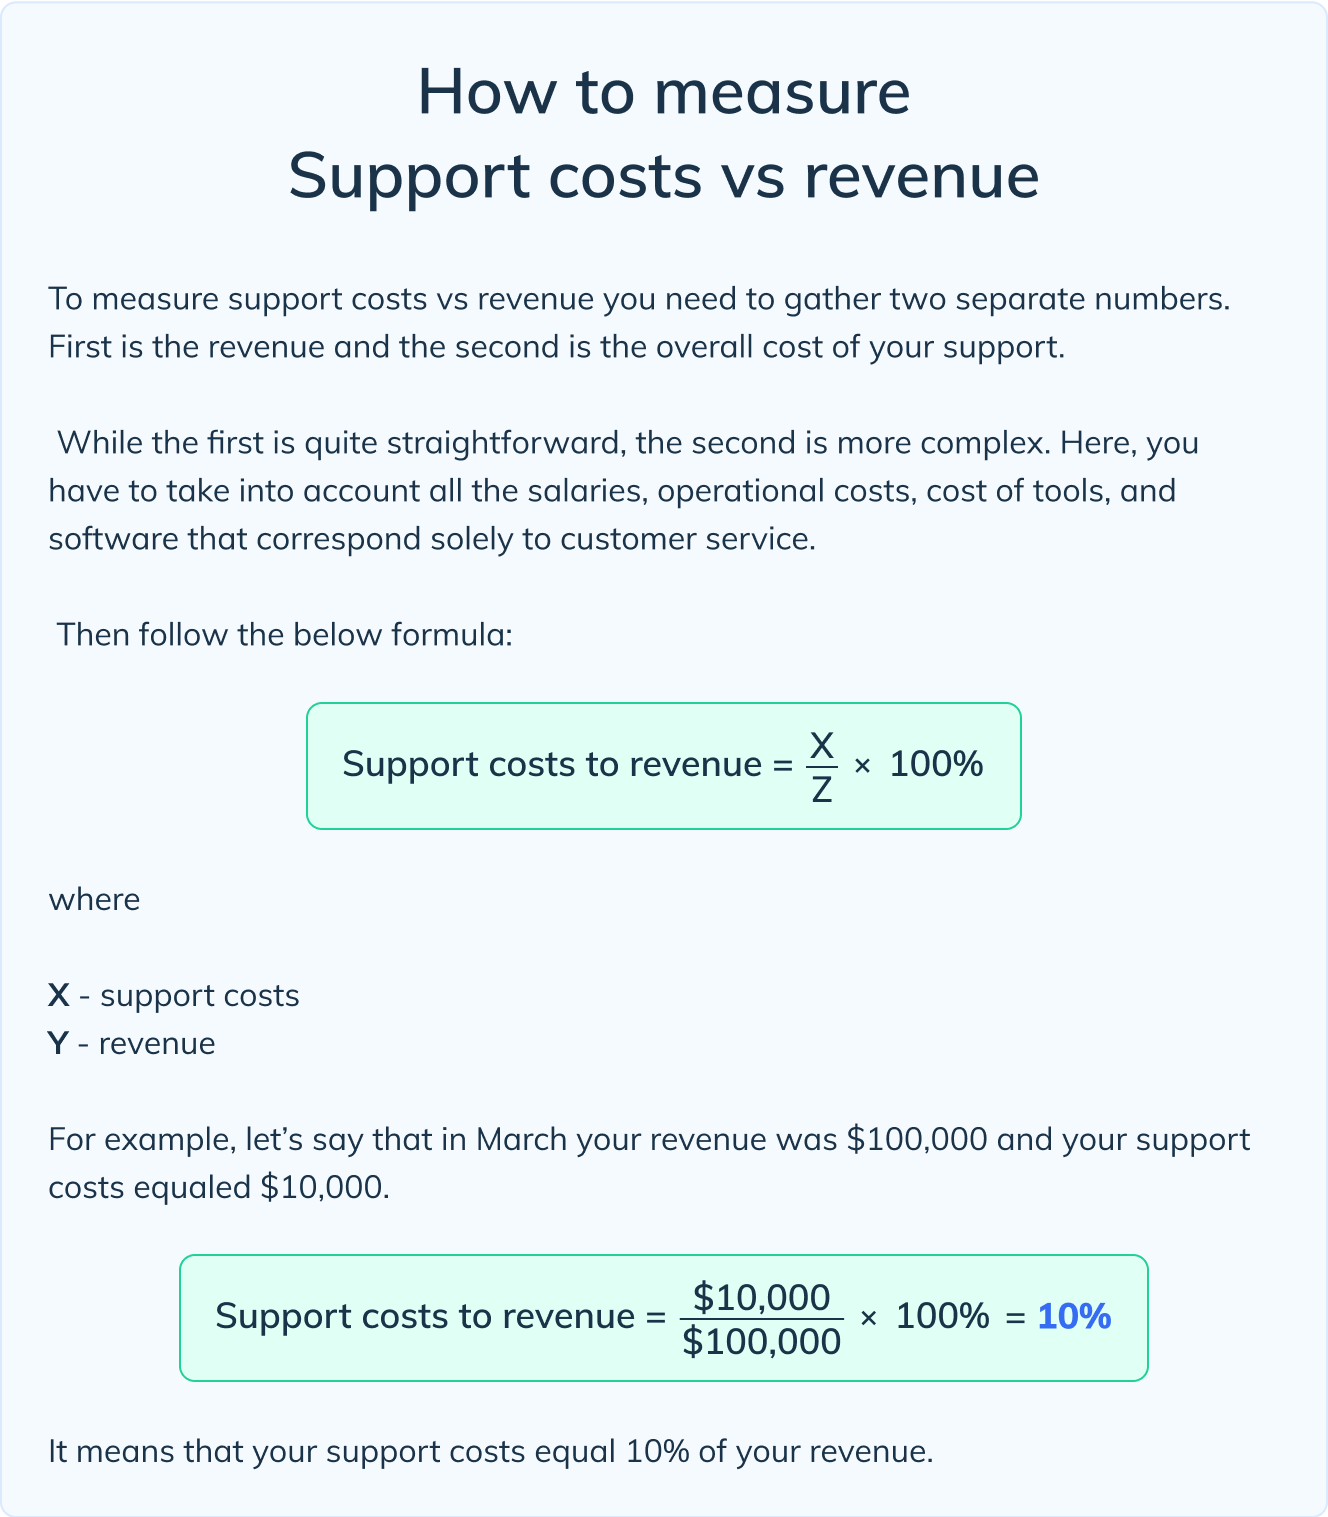 How to measure Support costs vs revenue